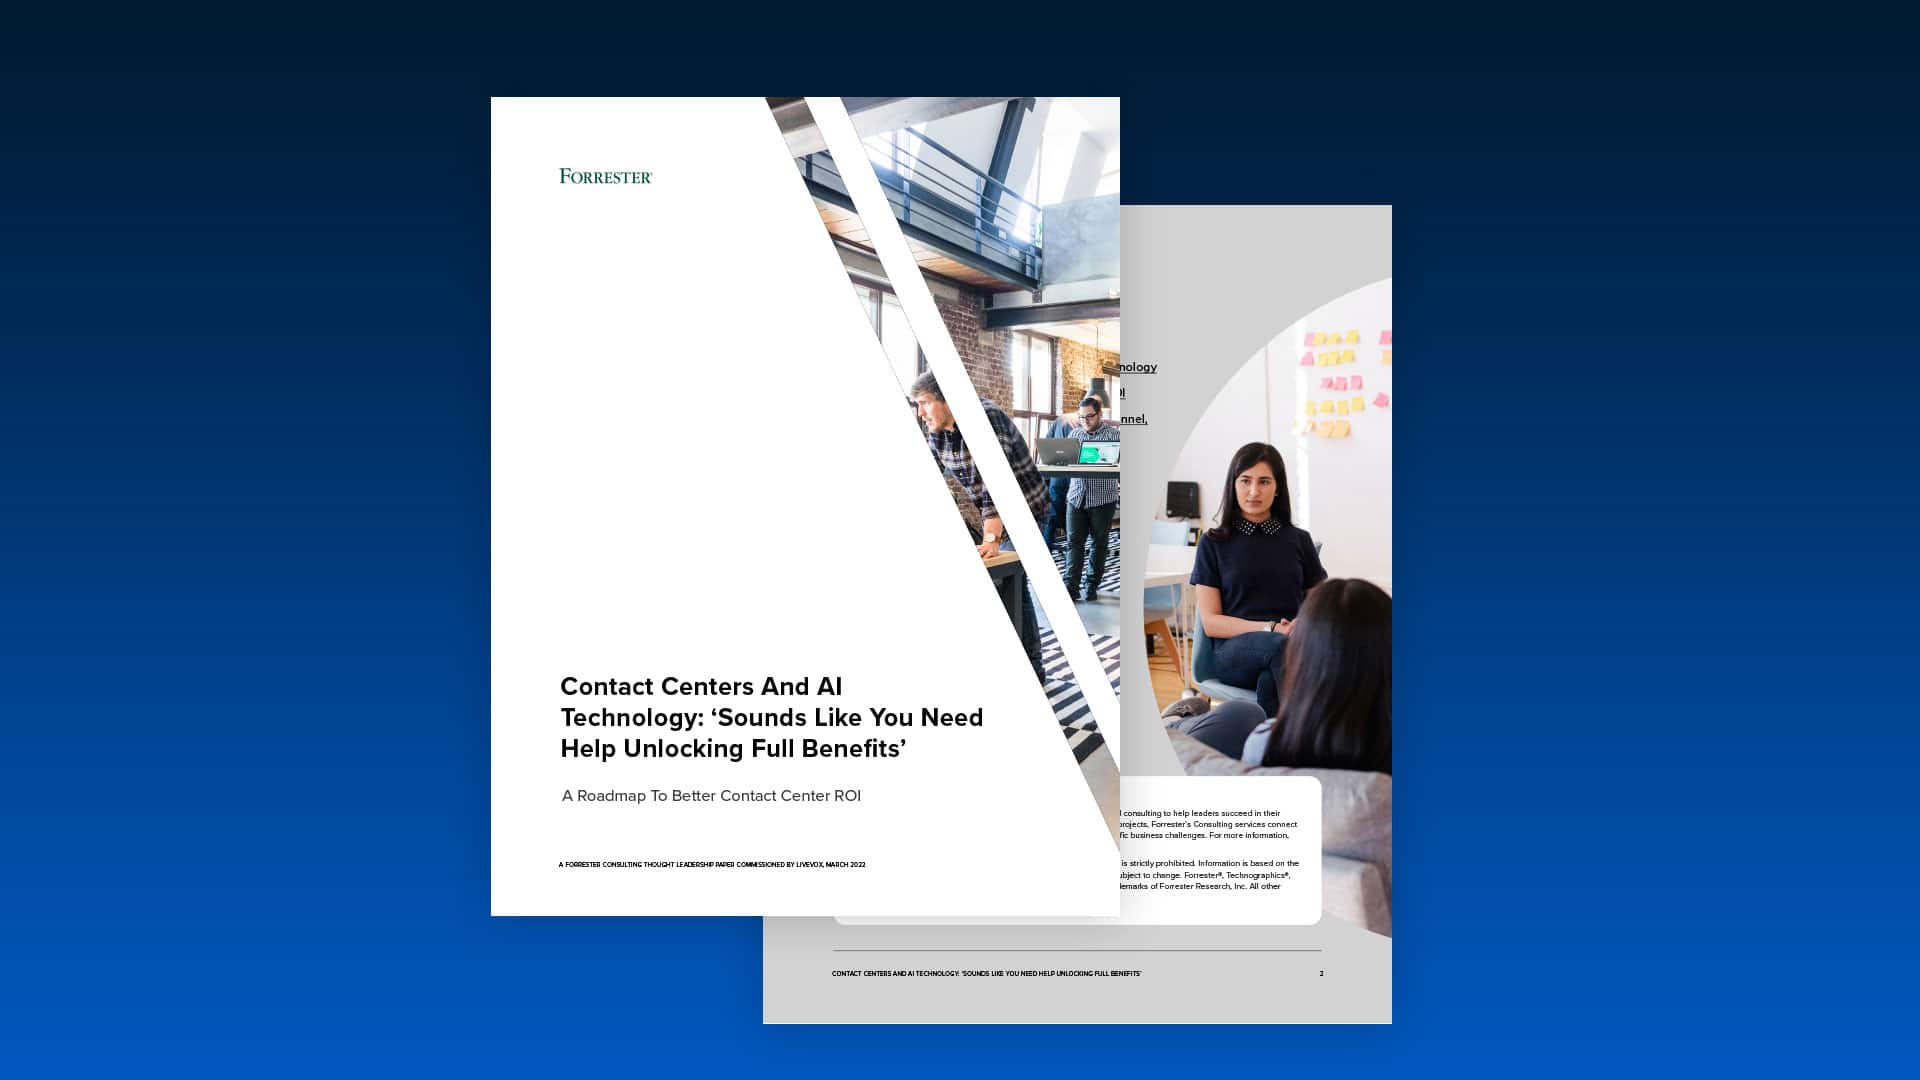 LiveVox [Forrester Study / Contact Centers and AI Technology]